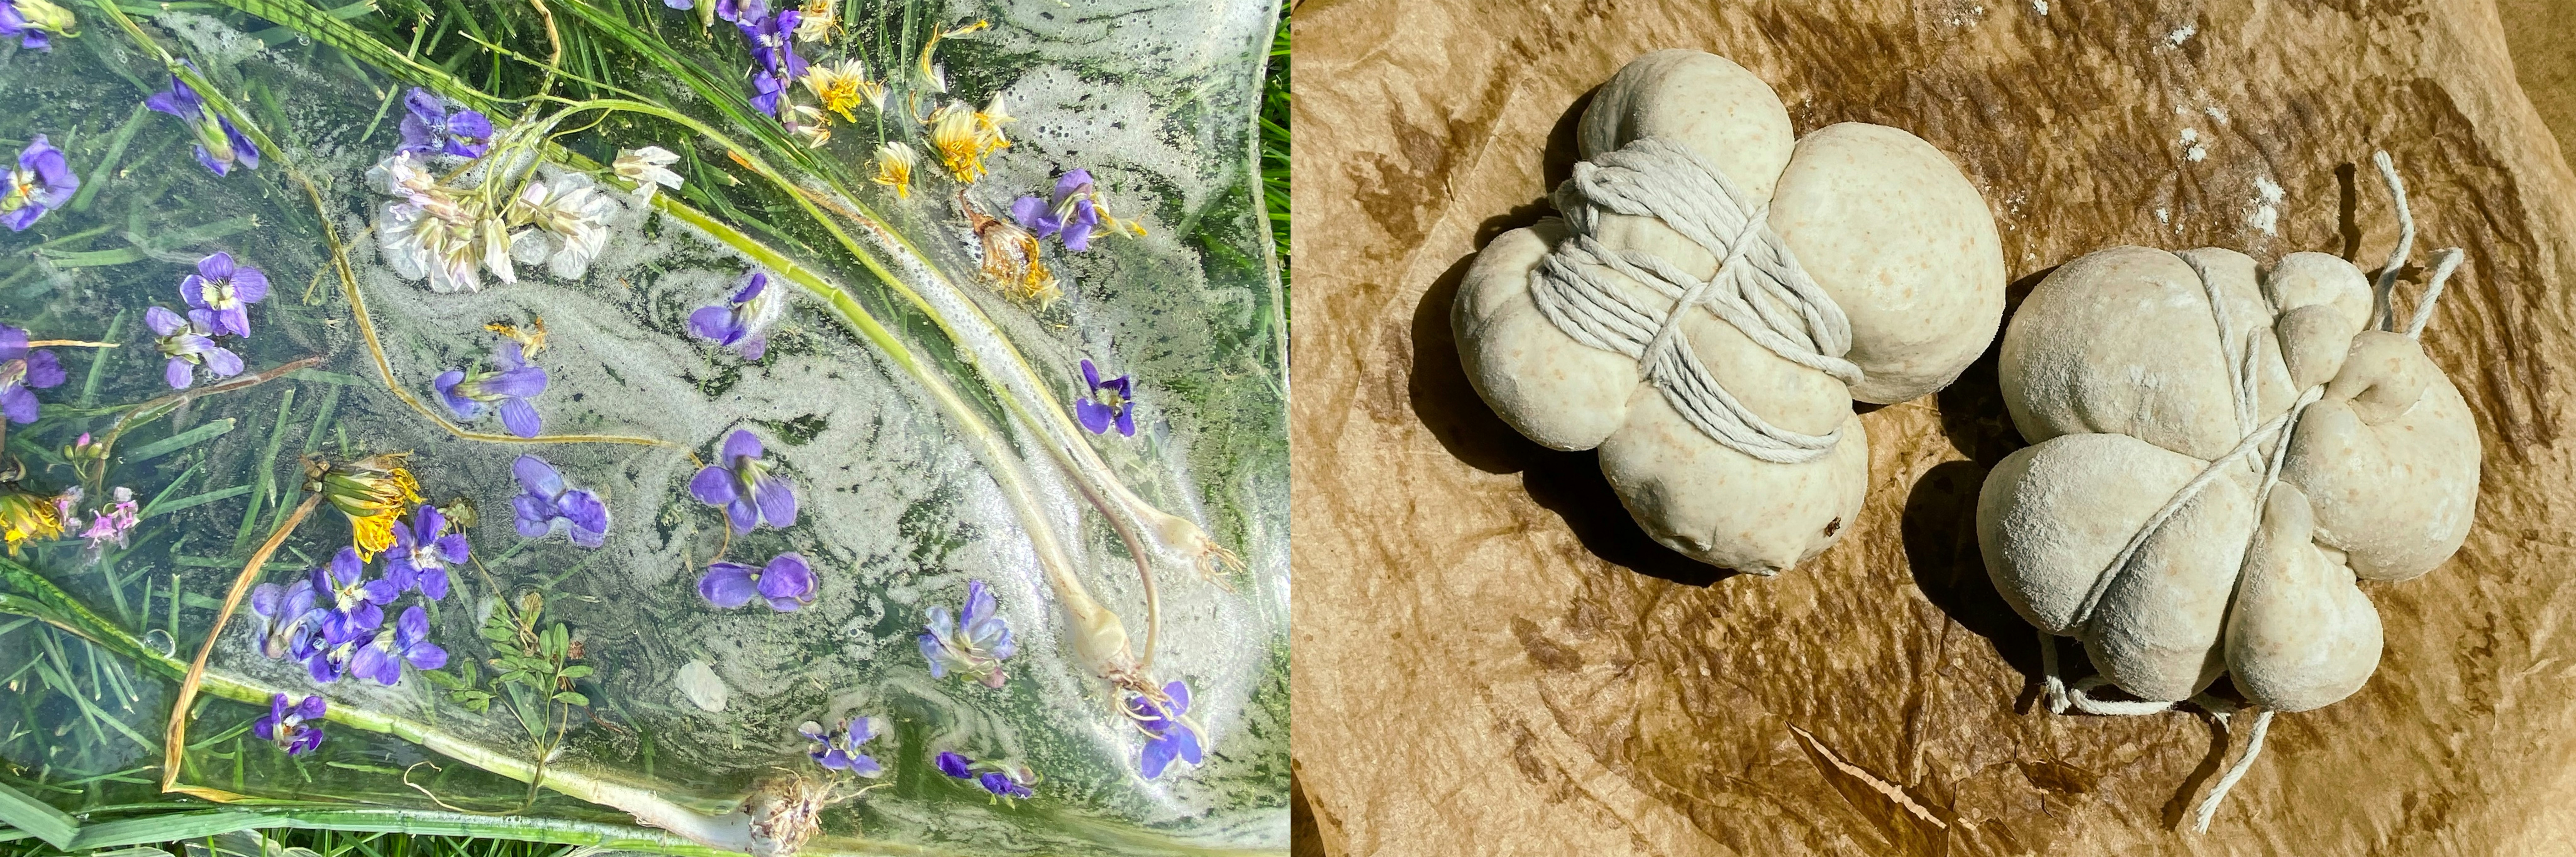 On left: "Untitled (Biomaterial Research)," 2020, Meech Boakye. Roundup contaminated wild violets, wild onions, purple dead nettle and dandelions suspended in gelatin bioplastic. Image courtesy of the artist. © Meech Boakye. On right: "Untitled (Sloppy Bondage Test)," 2021, Meech Boakye. Cherry blossom wild yeast loaves. Image courtesy of the artist. © Meech Boakye.